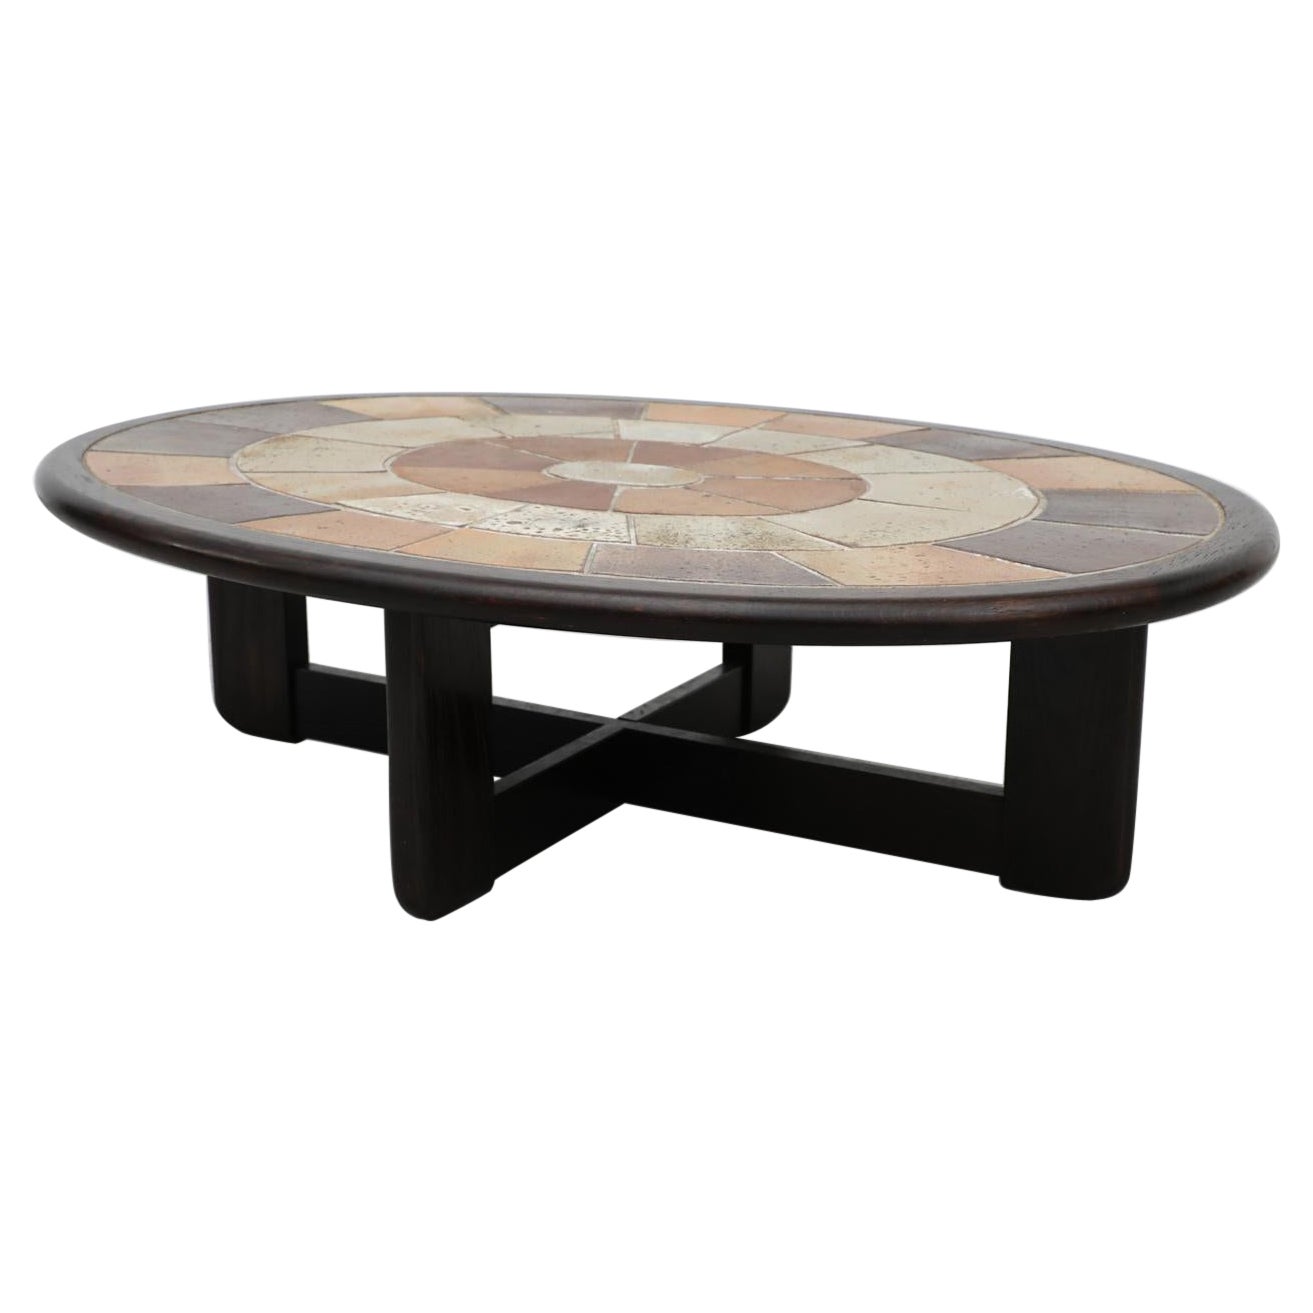 Roger Capron Style Oval Coffee Table by Tue Poulsen